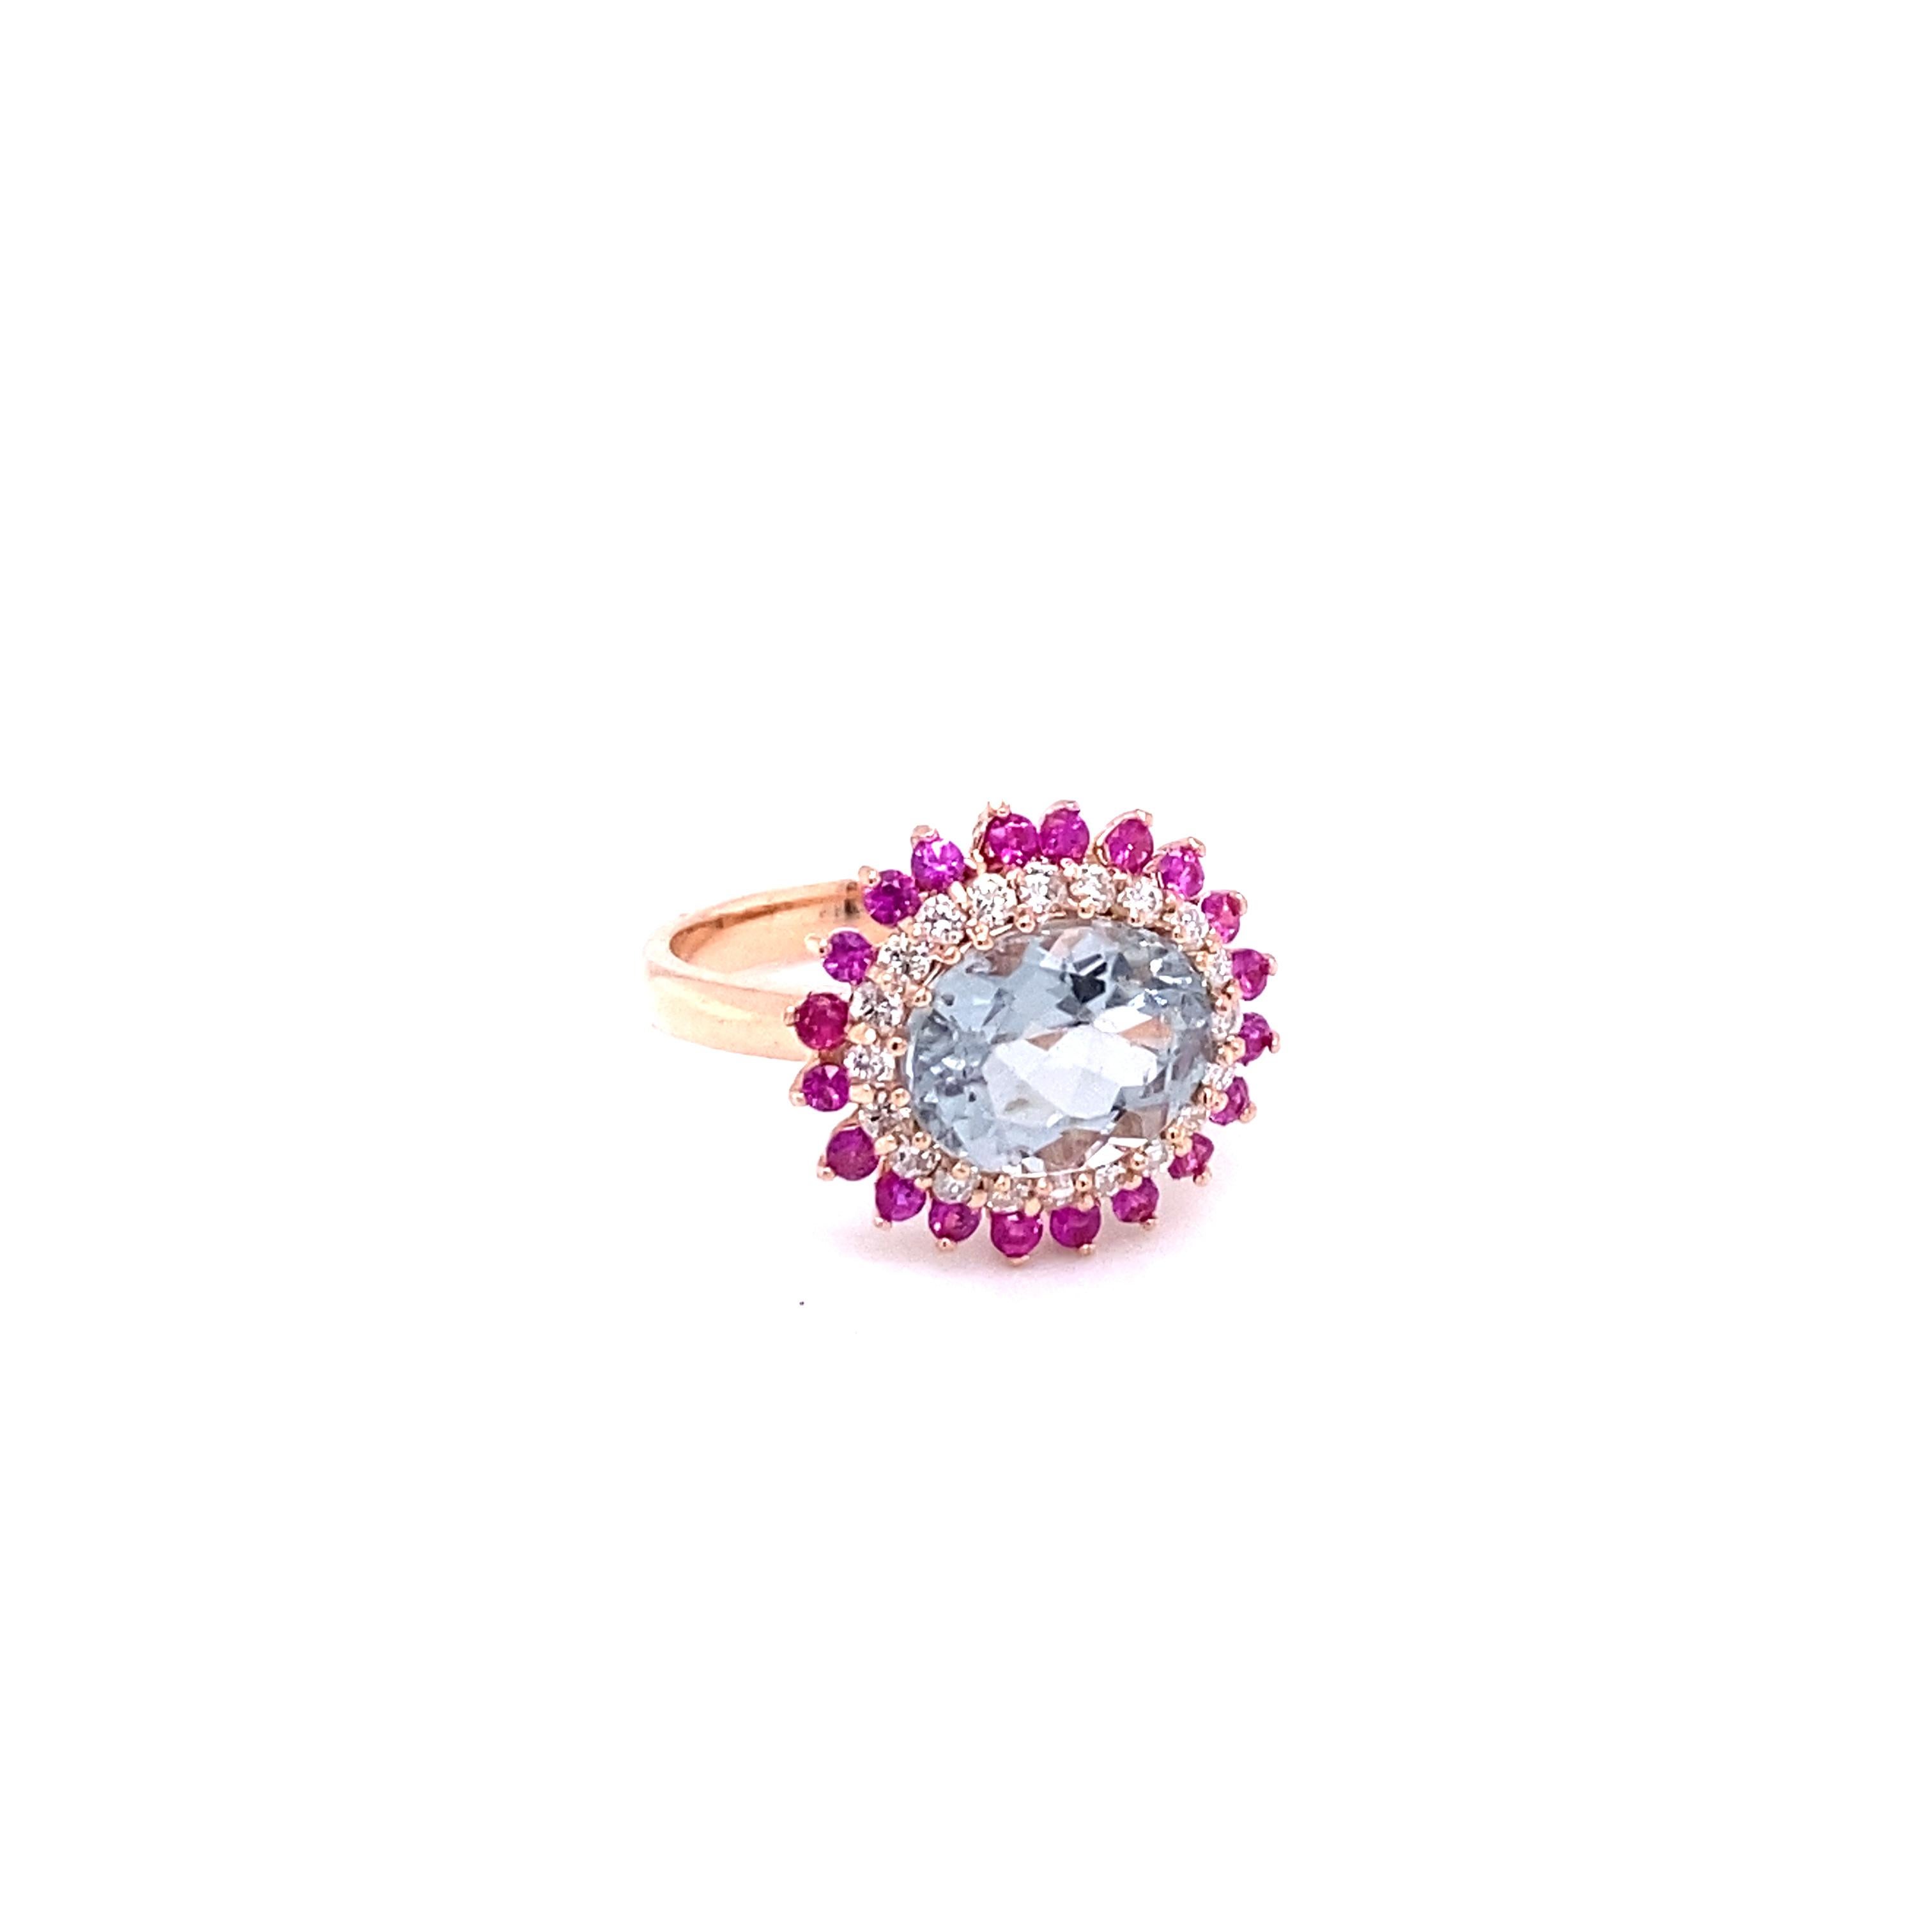 This Ring has a pretty light blue Oval Cut Tourmaline as its center stone that weighs 2.82 carats.
The Tourmaline is surrounded by 20 sparkly Round Cut Diamonds that weigh 0.32 Carats (Clarity: SI2, Color: F) and followed by a row of bright Pink